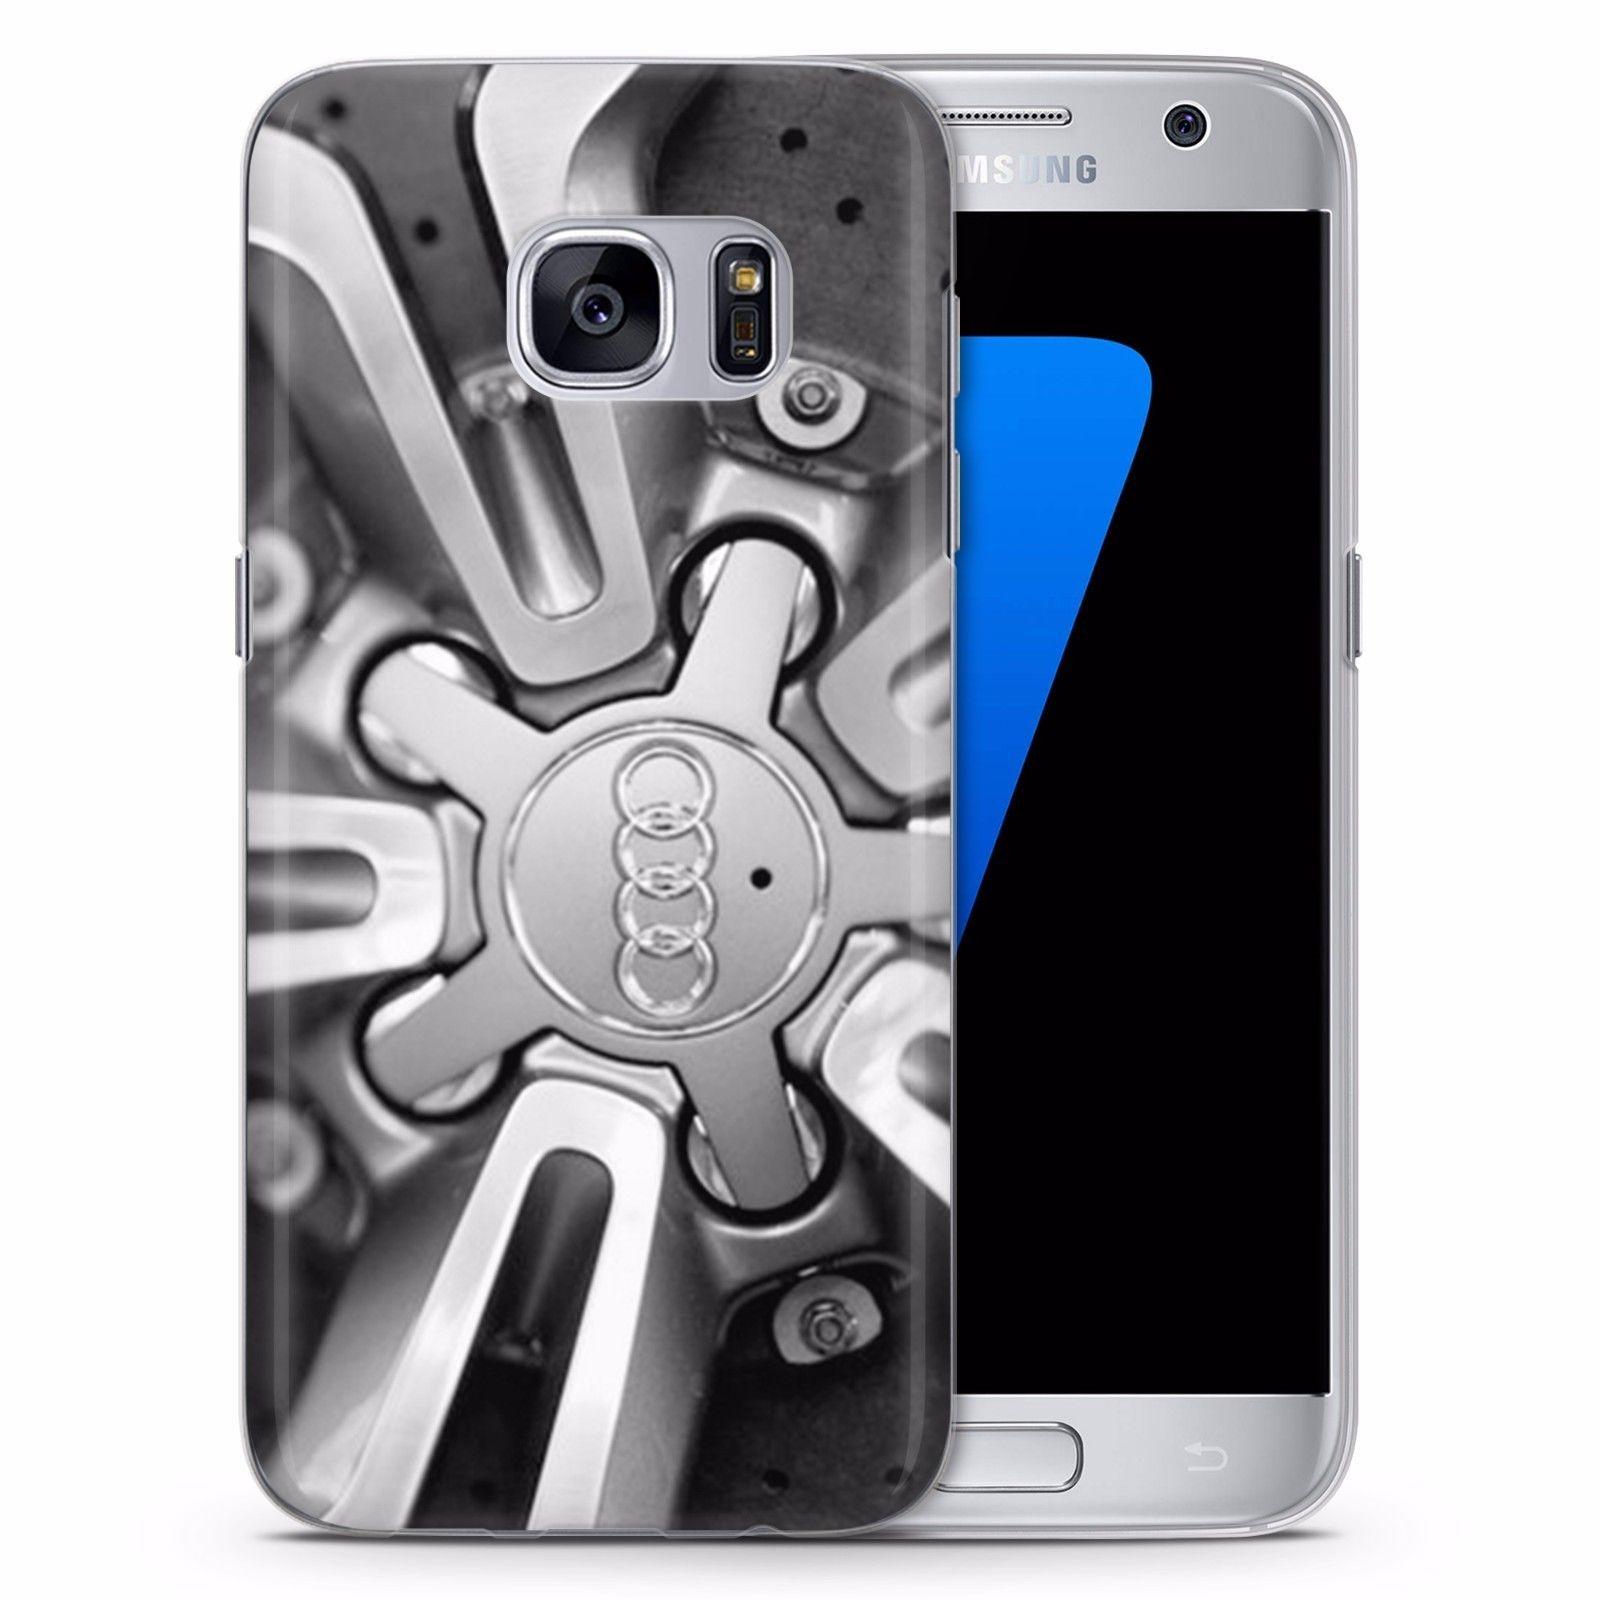 Samsung Galaxy S Logo - AUDI LOGO QUATTRO RS S LINE CASE COVER FITS FOR SAMSUNG GALAXY S